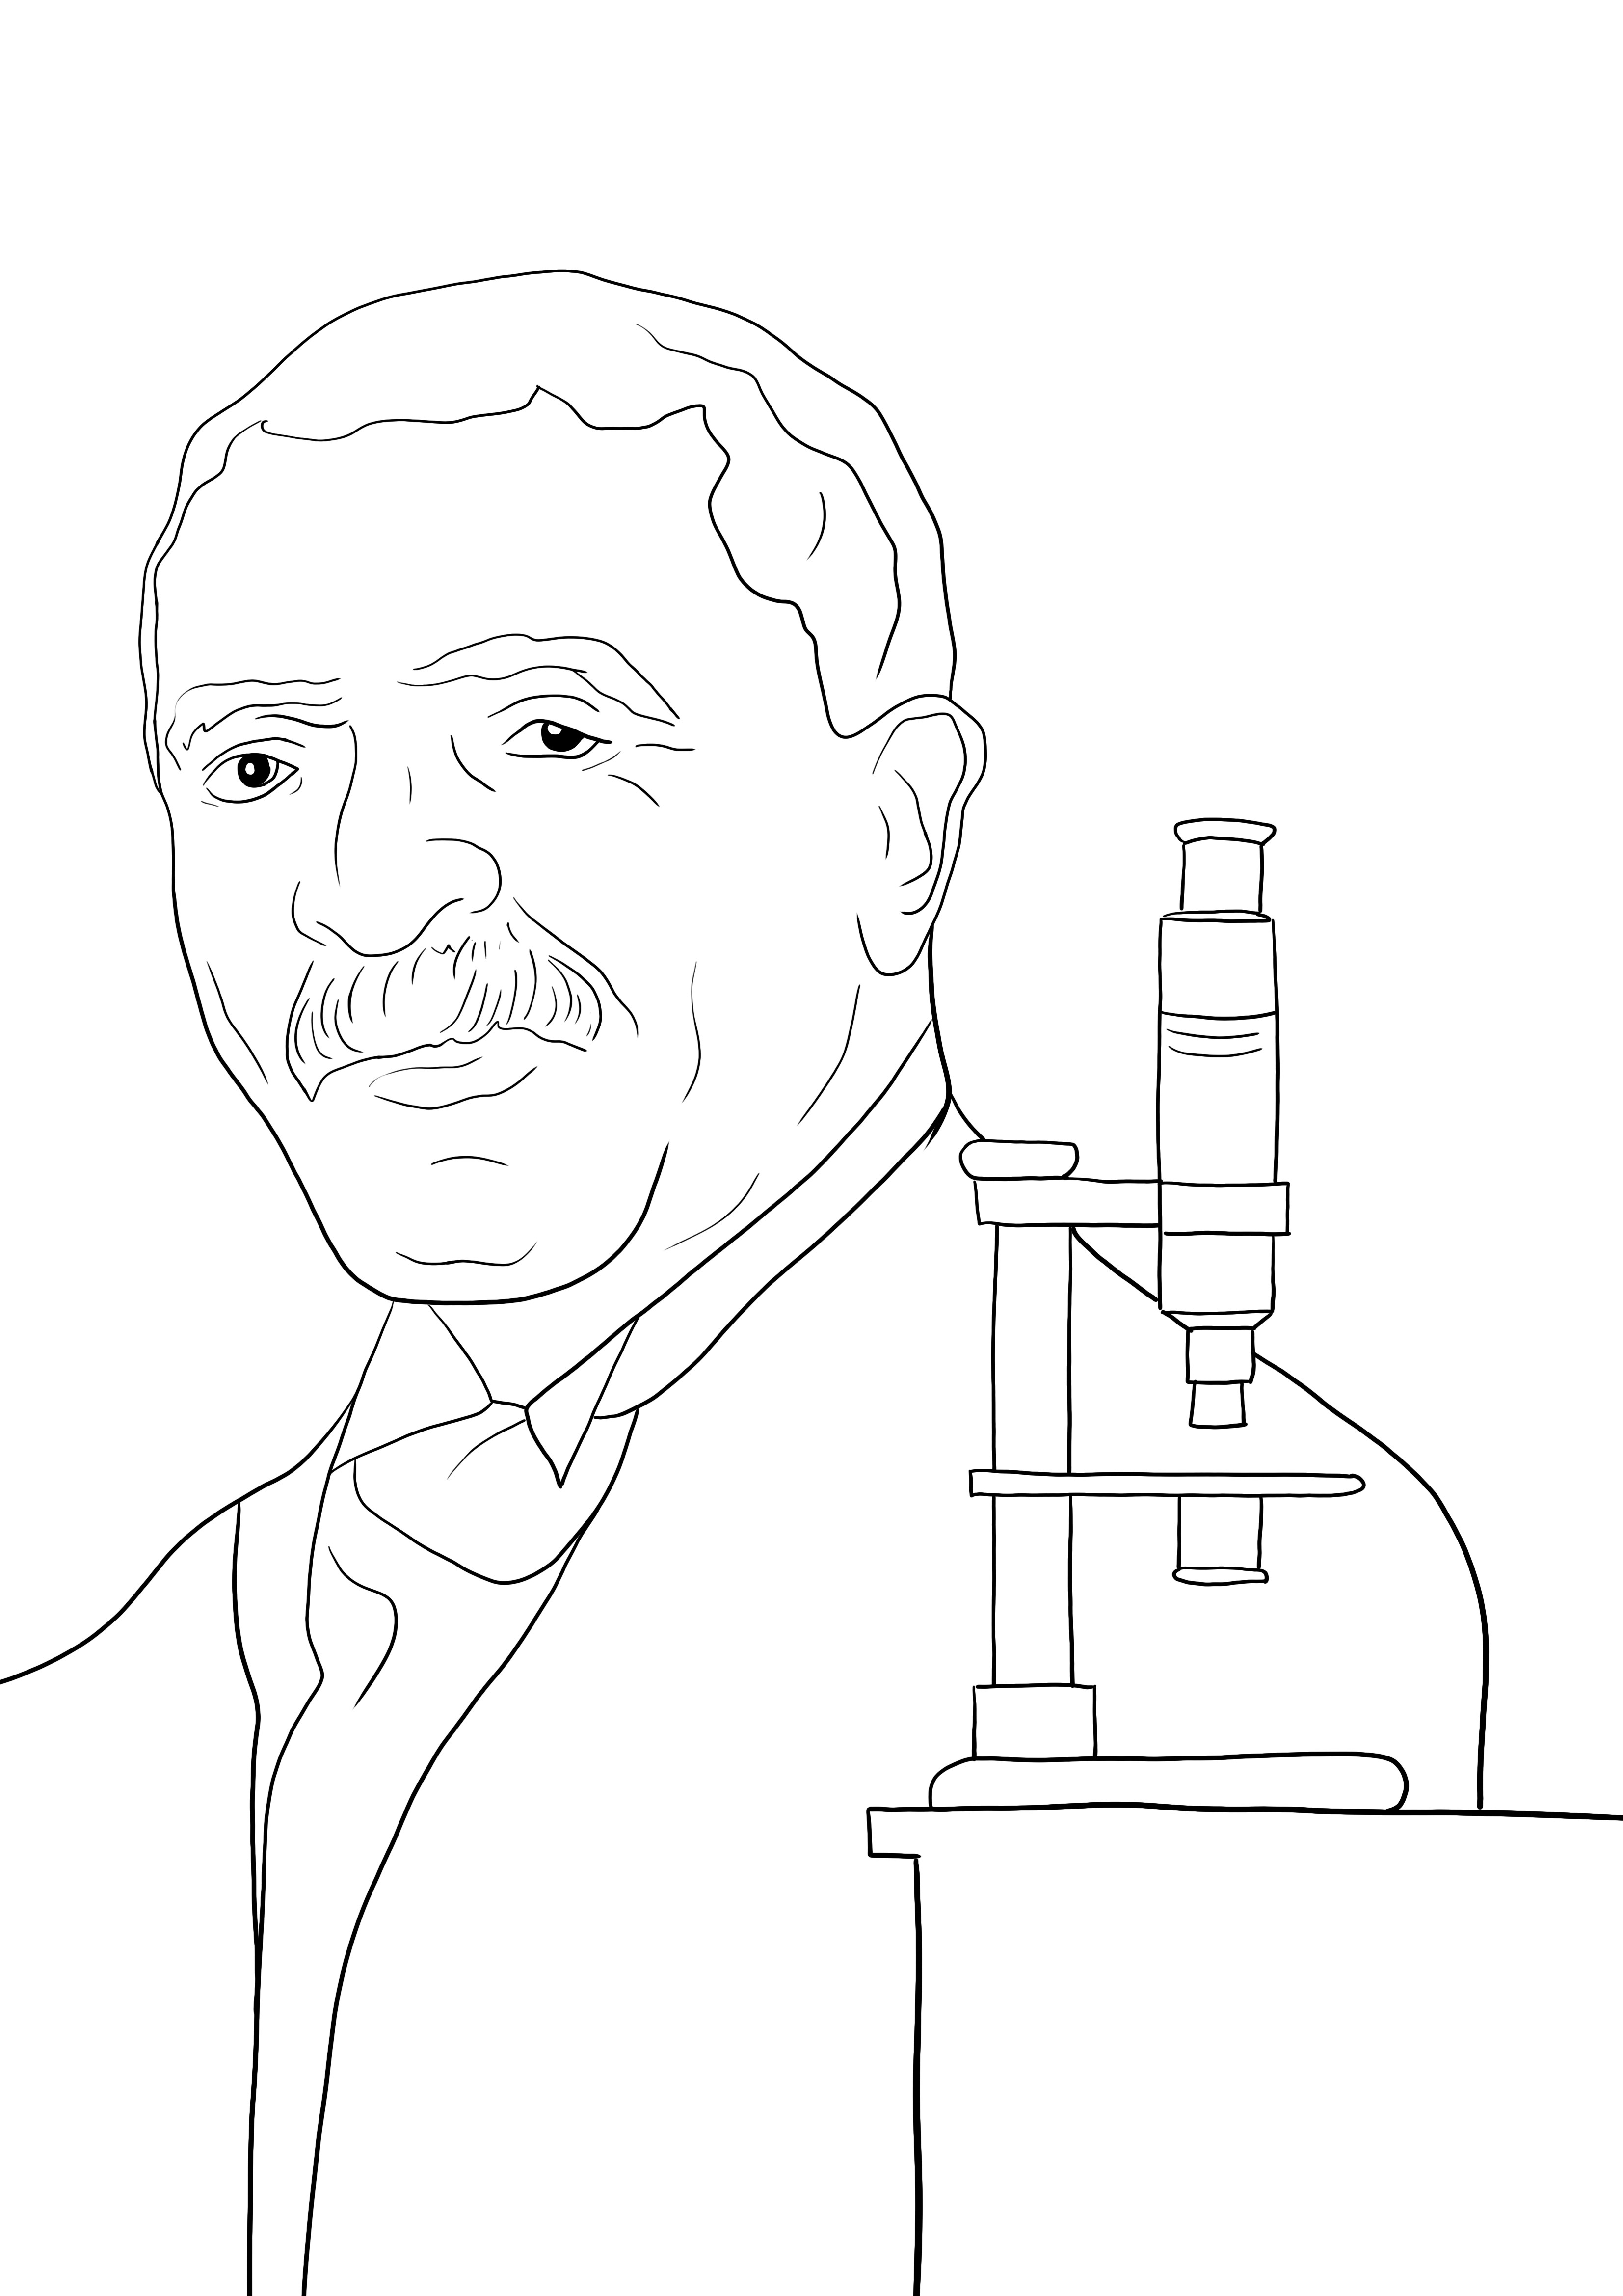 George Washington Carver coloring page for free use